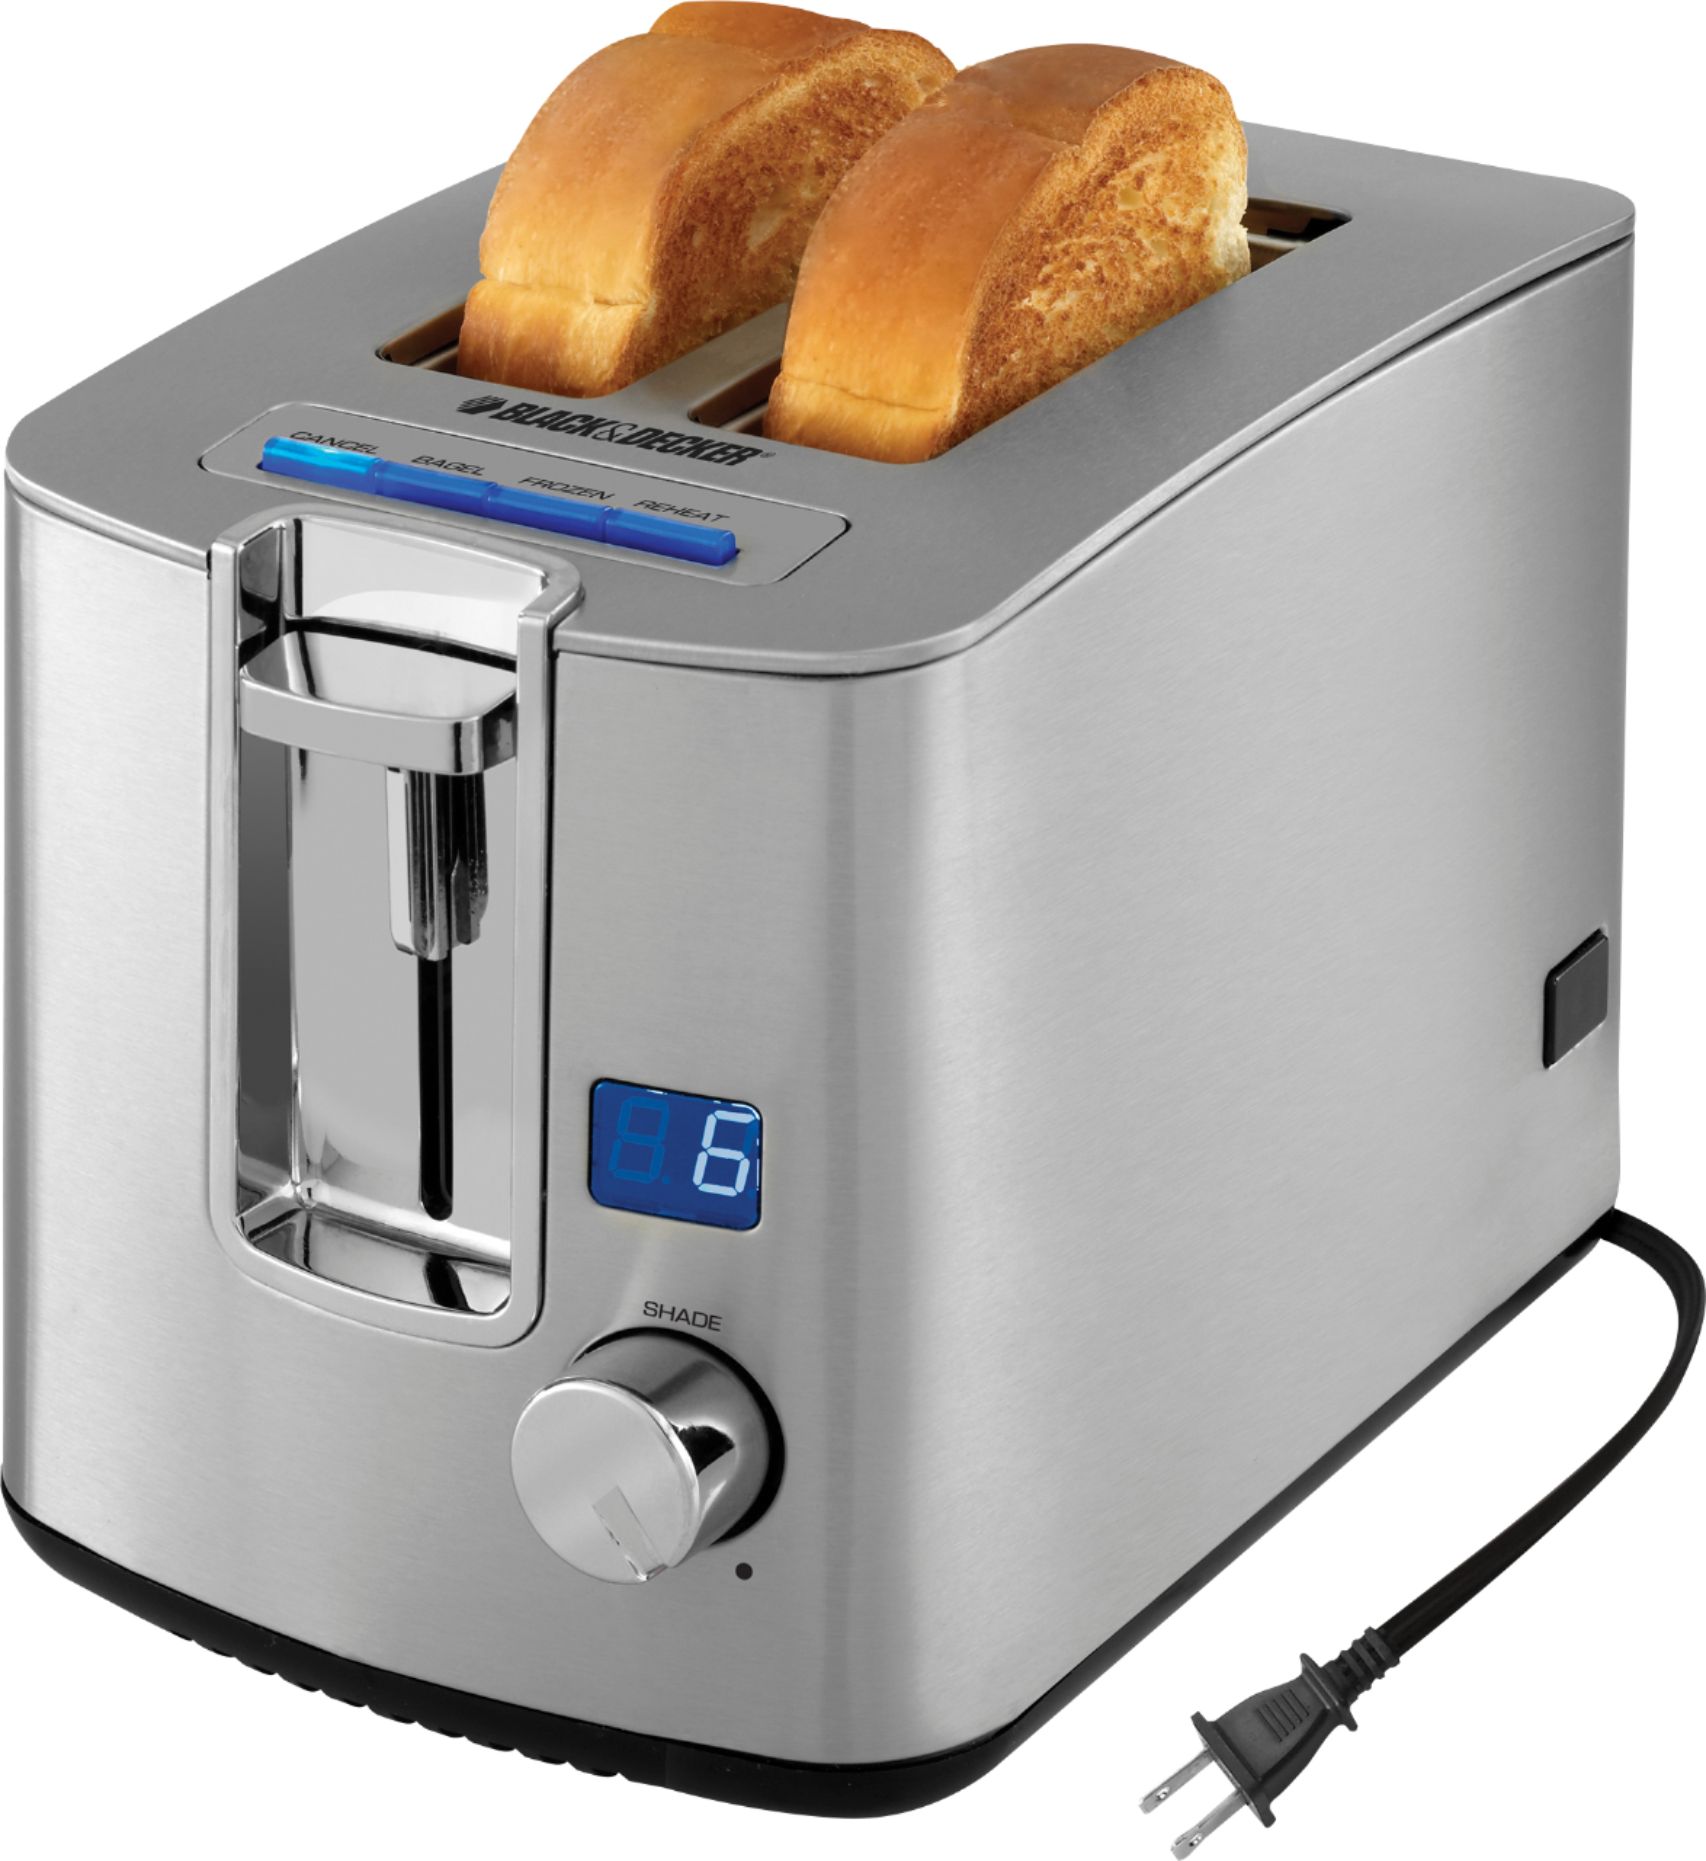 Black & Decker Two Slice Toaster Brushed Stainless Steel, Silver TR1280S -  Best Buy